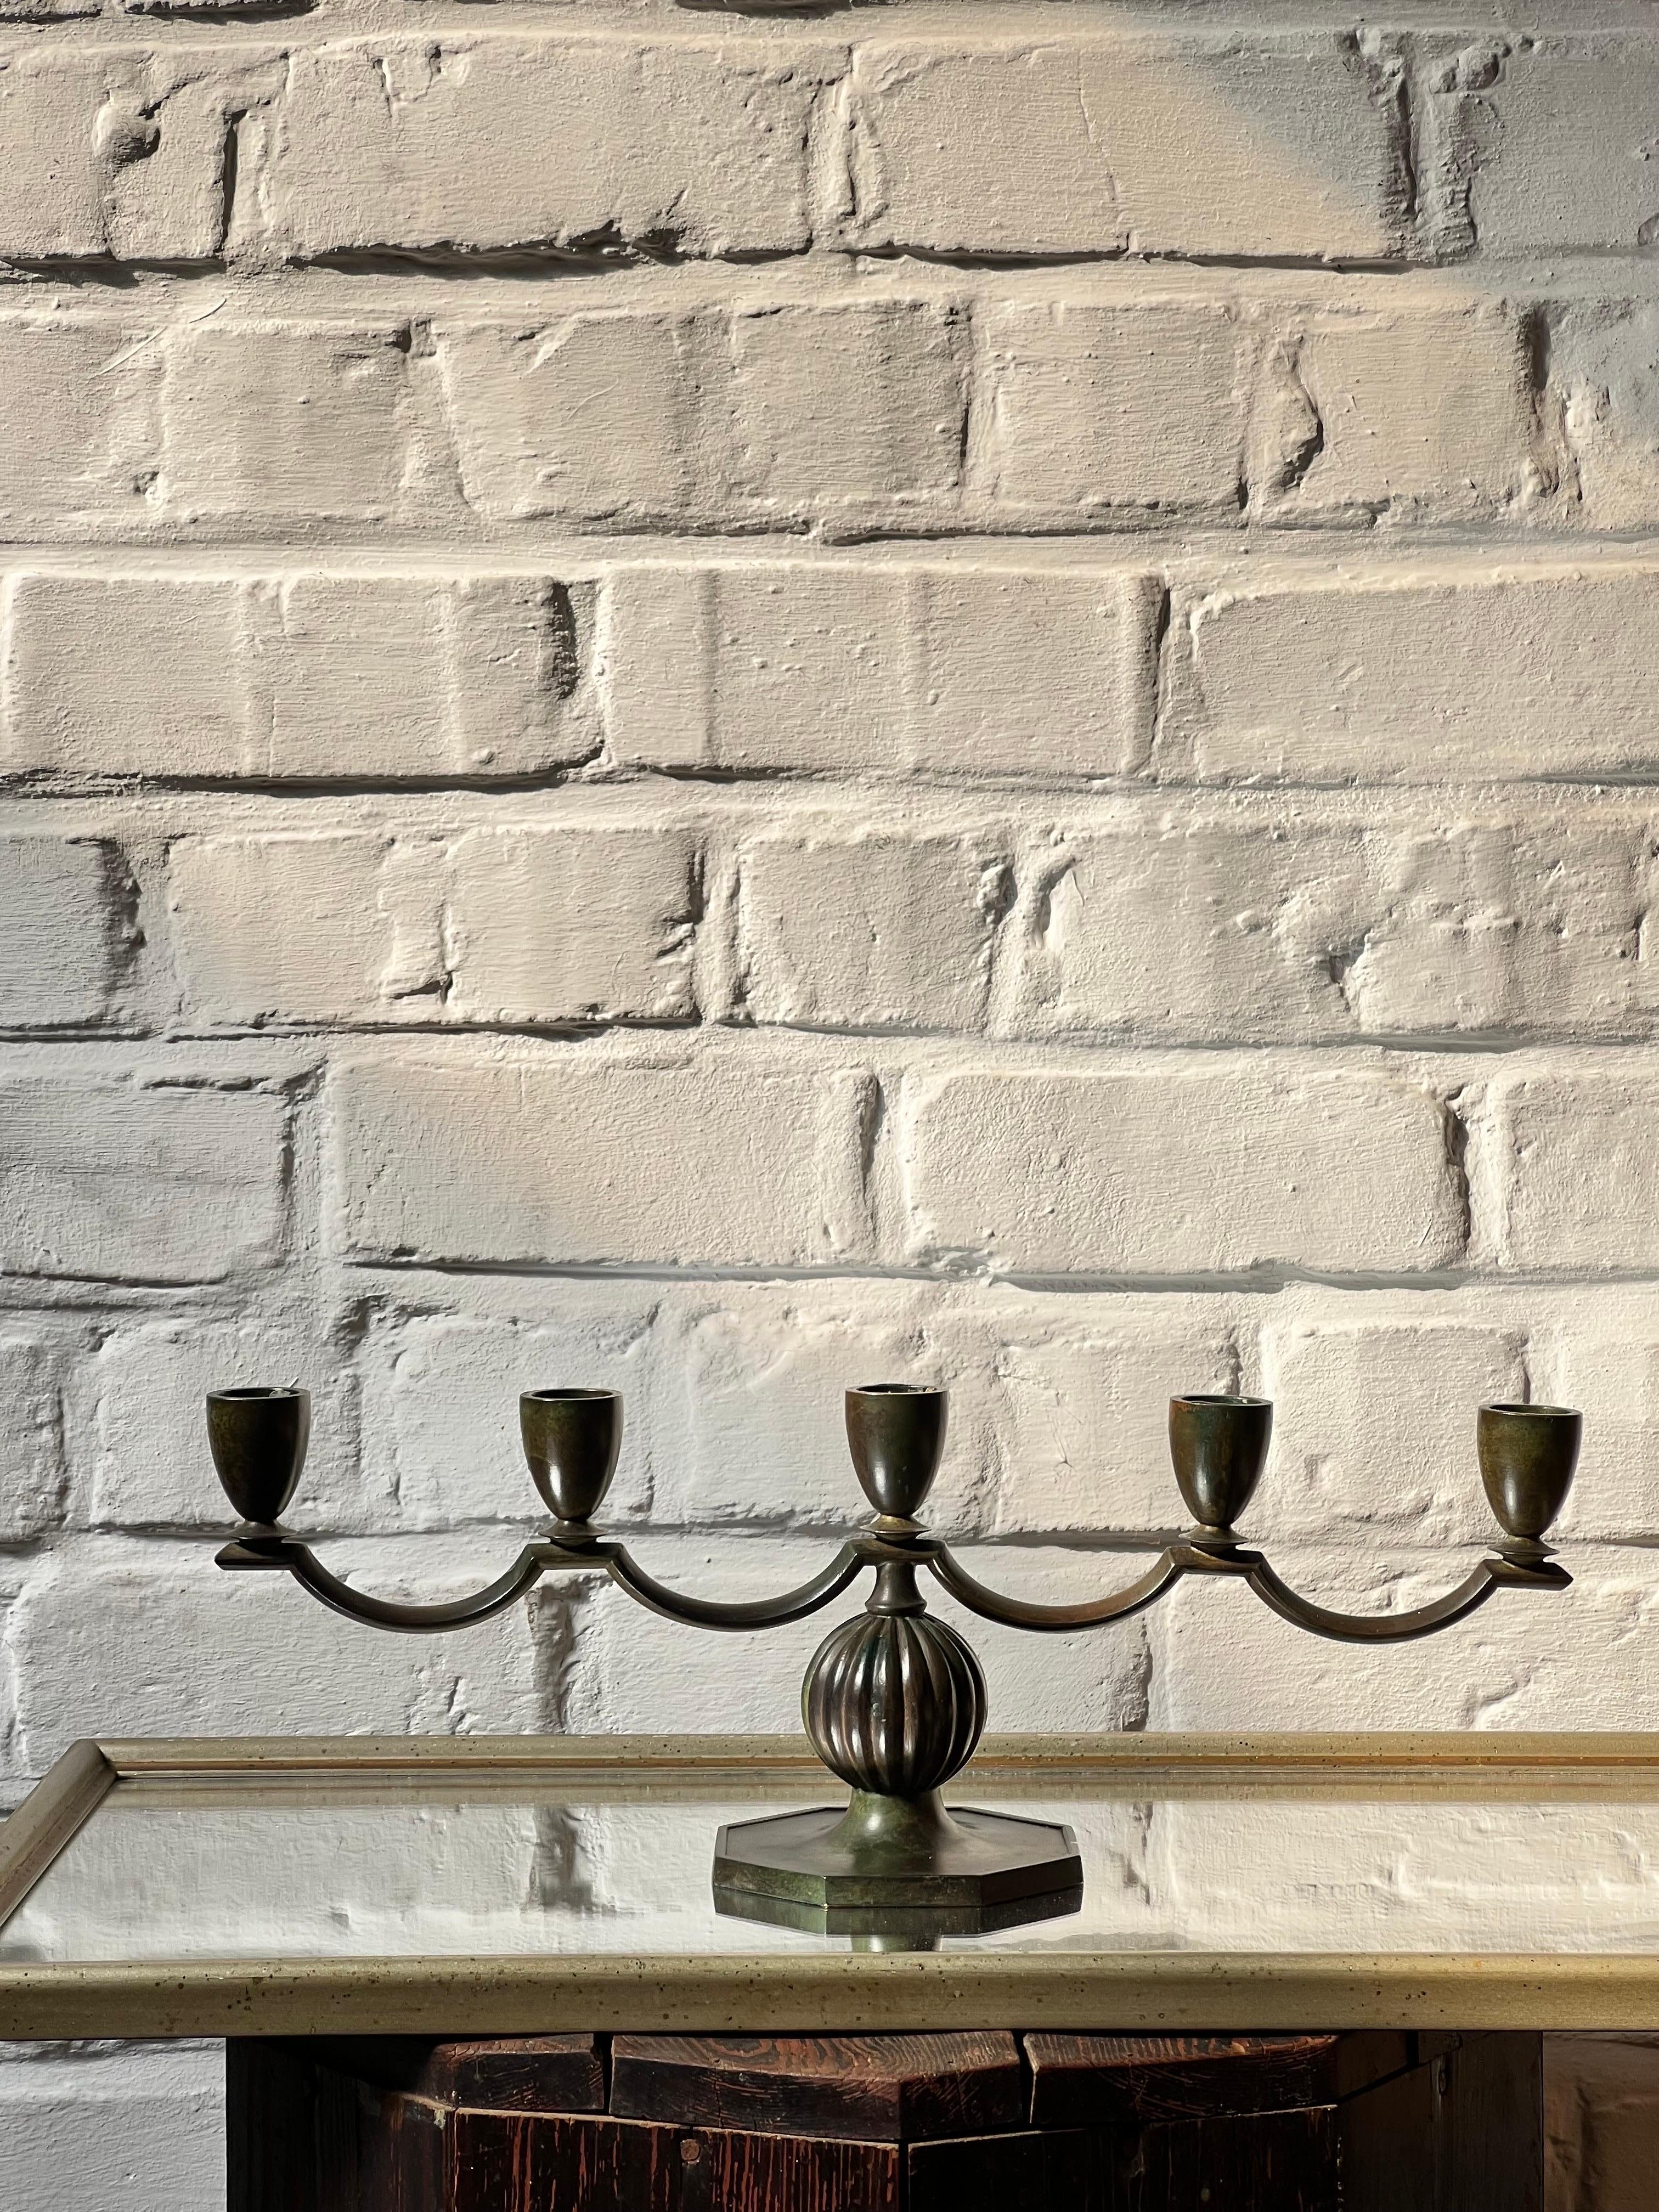 Elegant decorative patinated bronze candelabra fro 5 candles made in Sweden in 1930's by GAB Brons. Part of the Swedish Grace area. Not a candelabra you see very often. Showing some patina with decorative details inspired by the antique Roman and